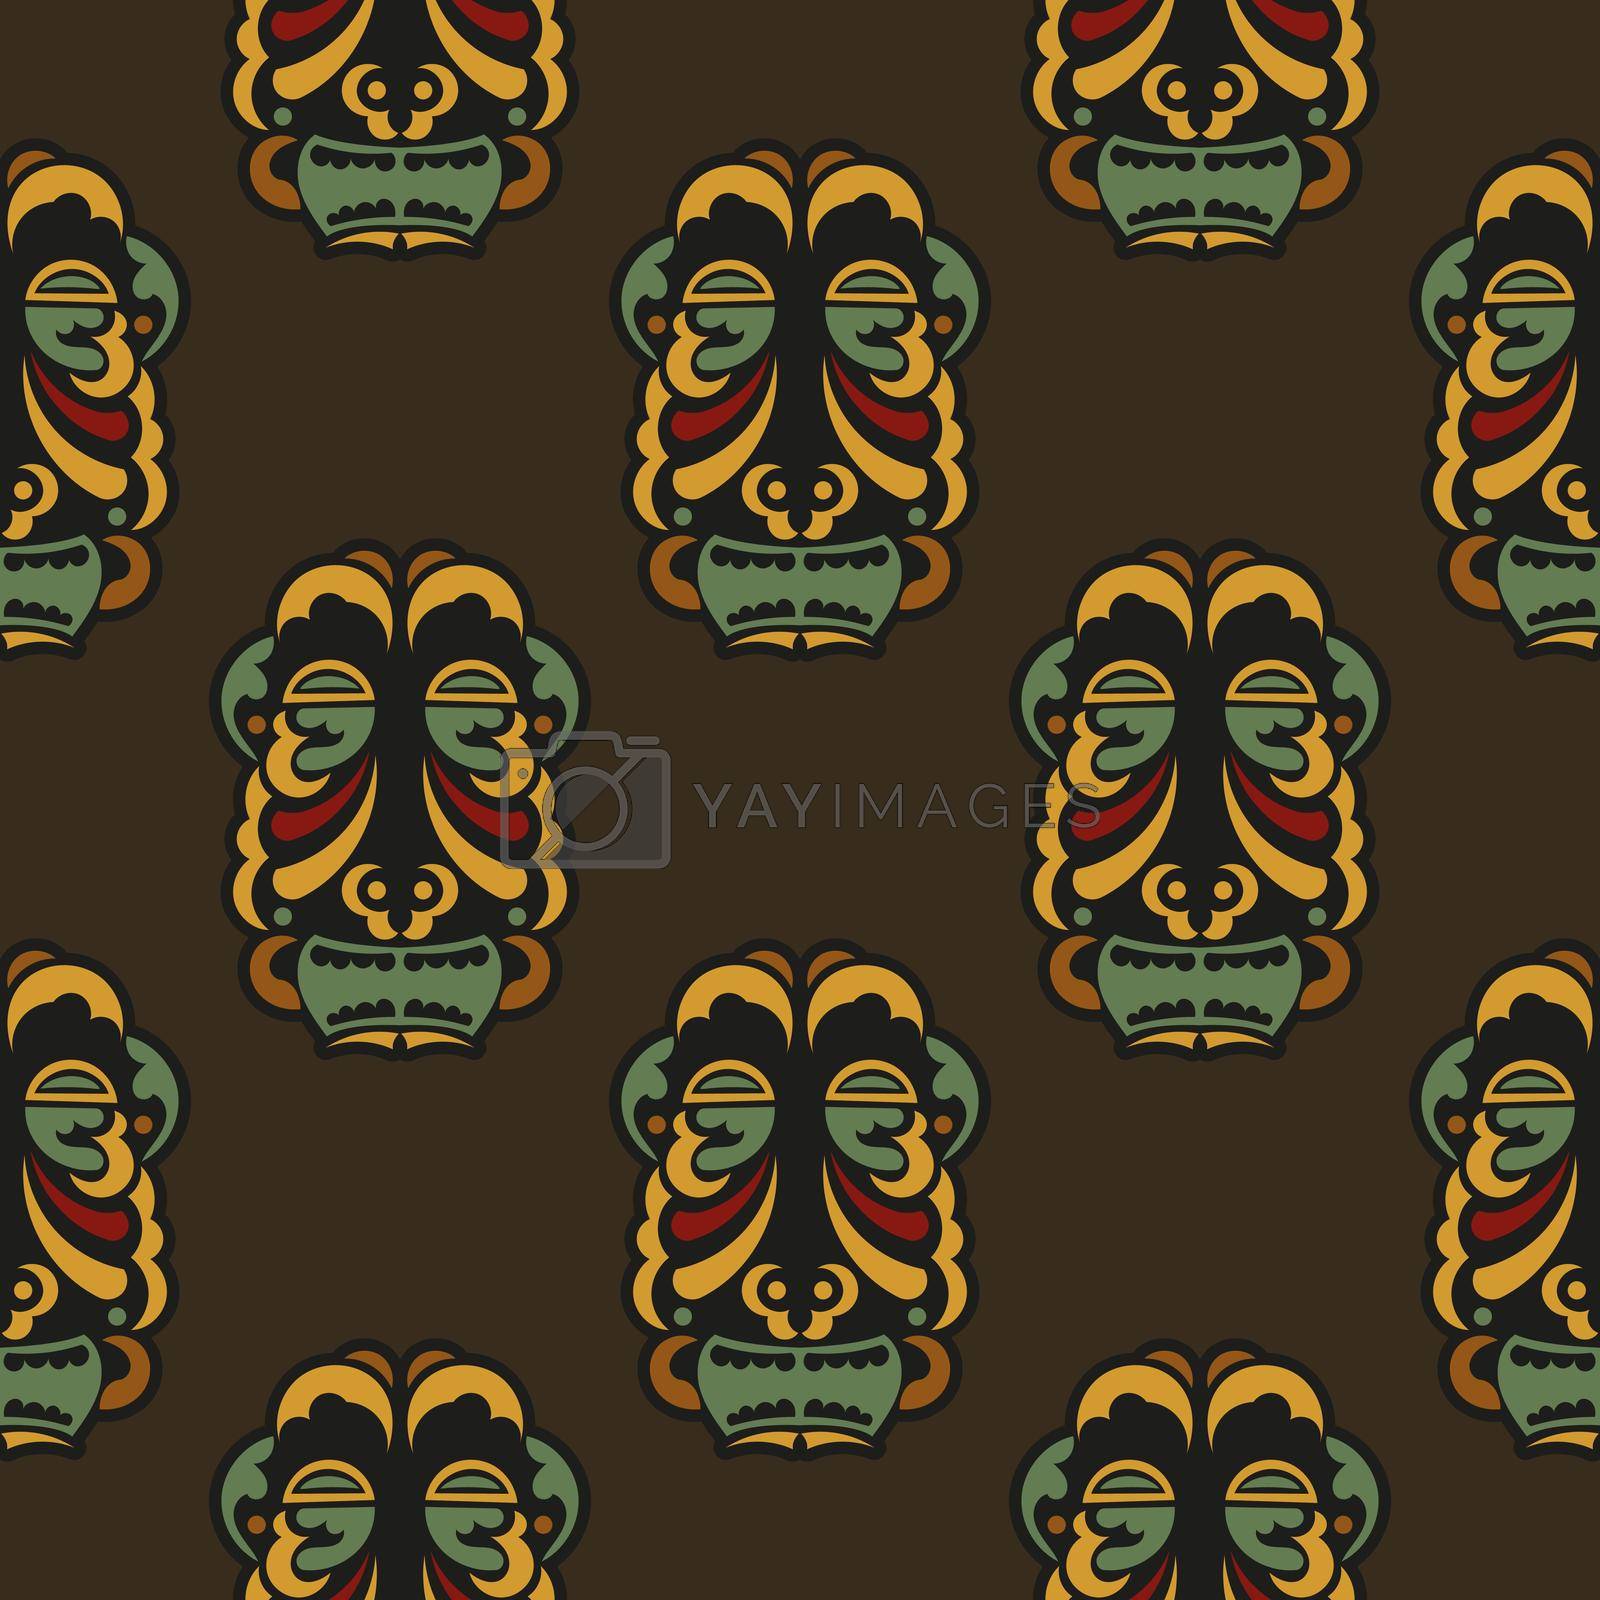 Seamless pattern with masks of the gods in the colors of the baroque style. Good for clothing, textiles, backgrounds and prints. Vector illustration.